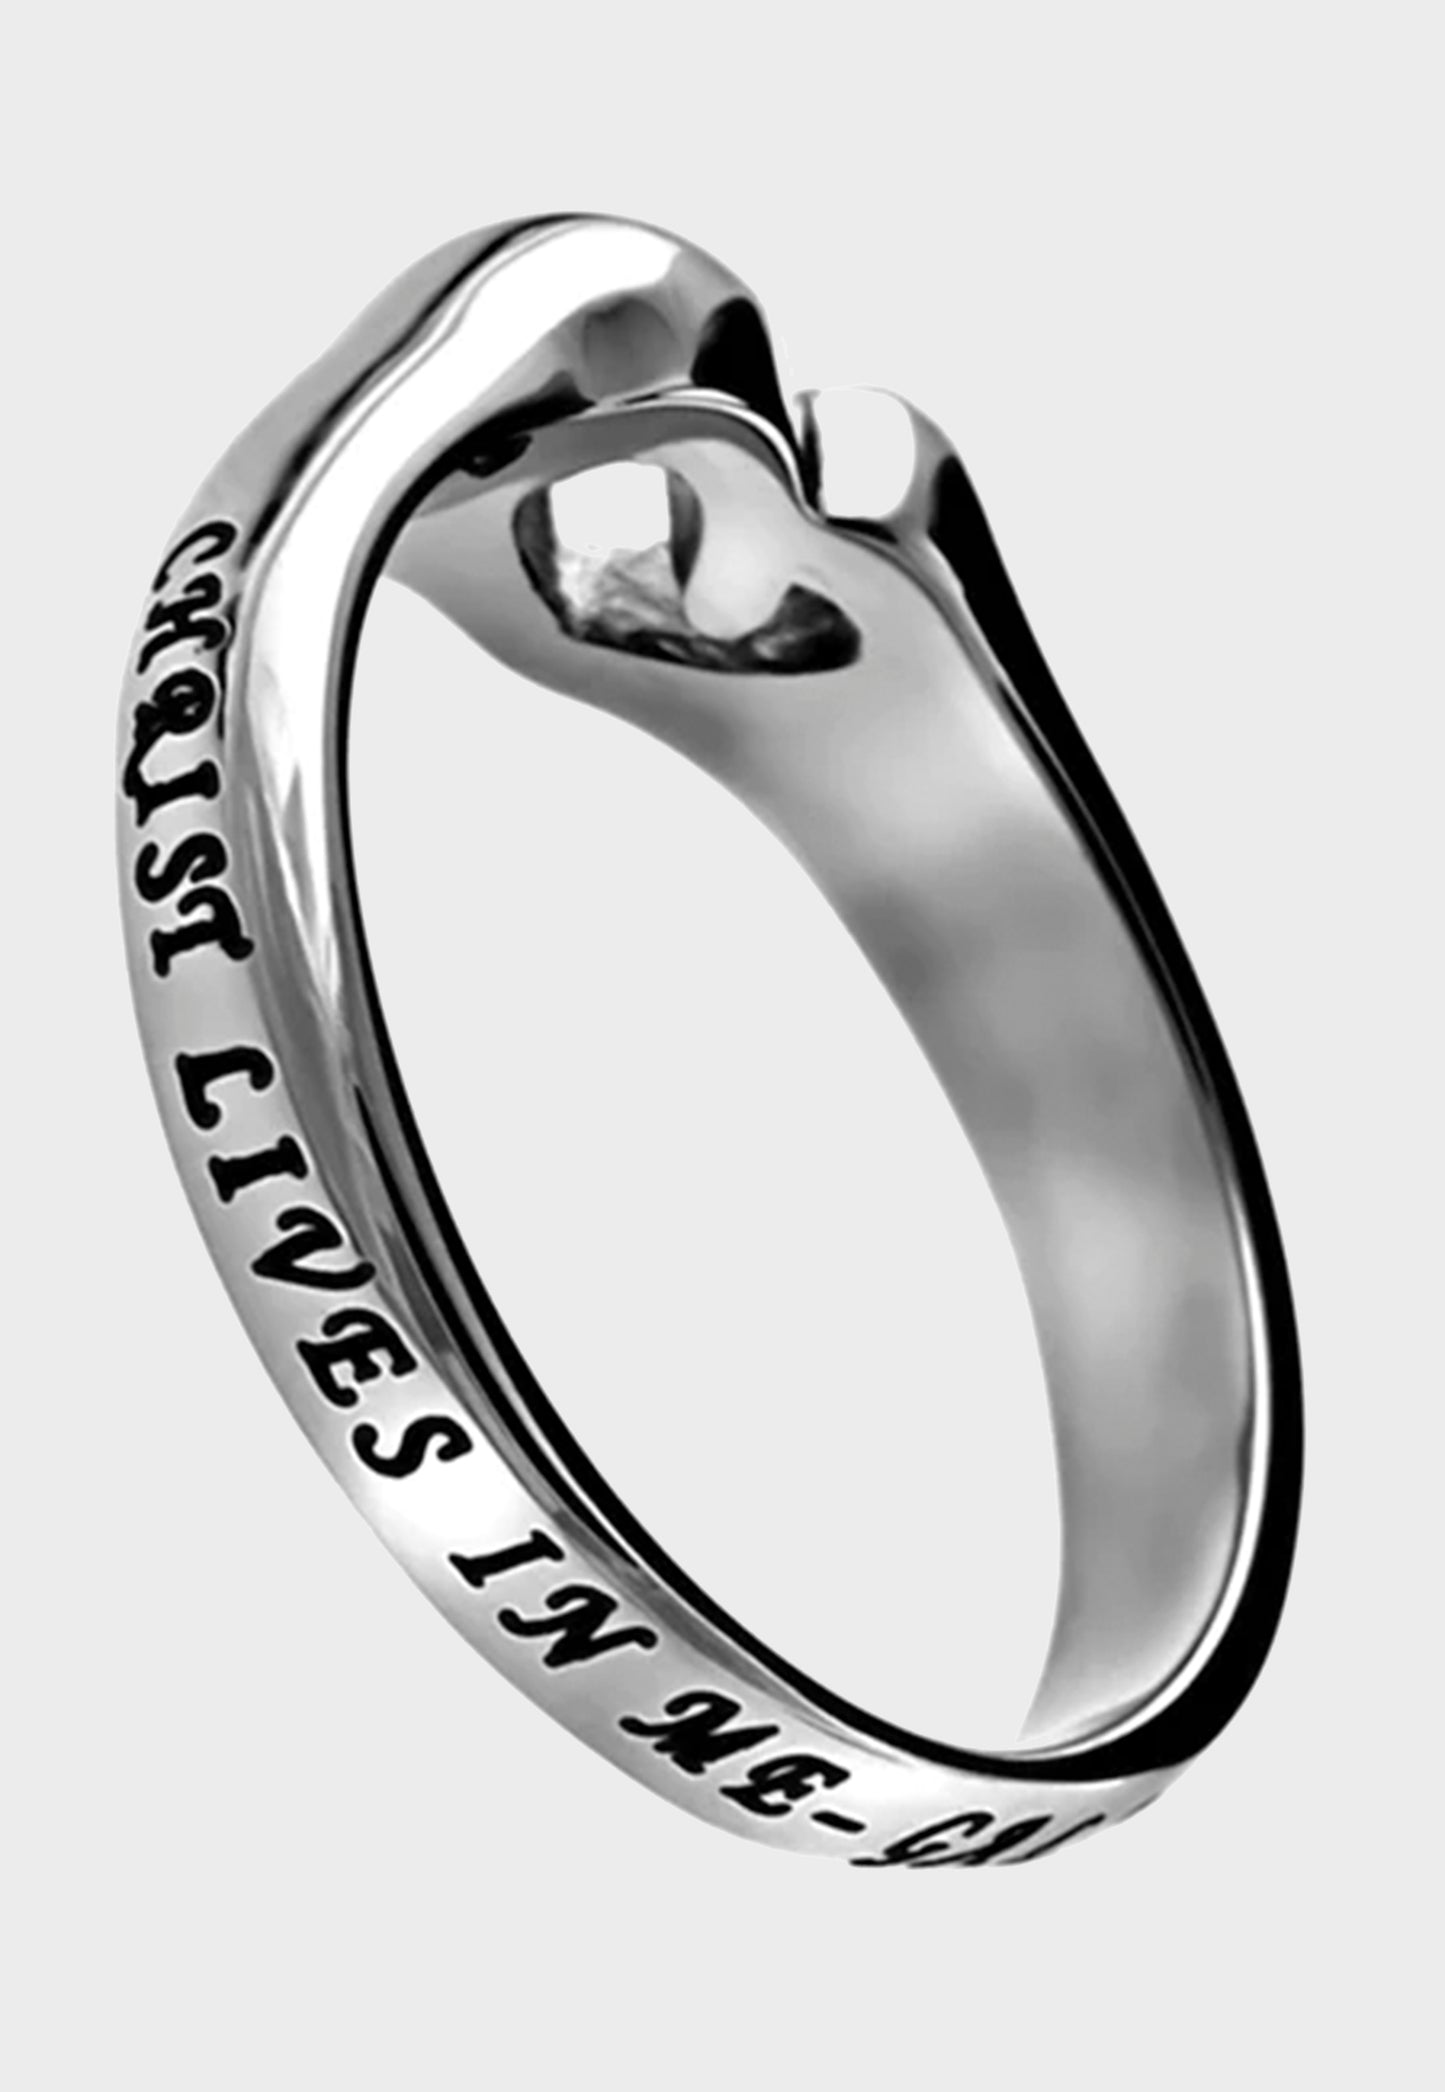 Women's Christian ring with Bible verse